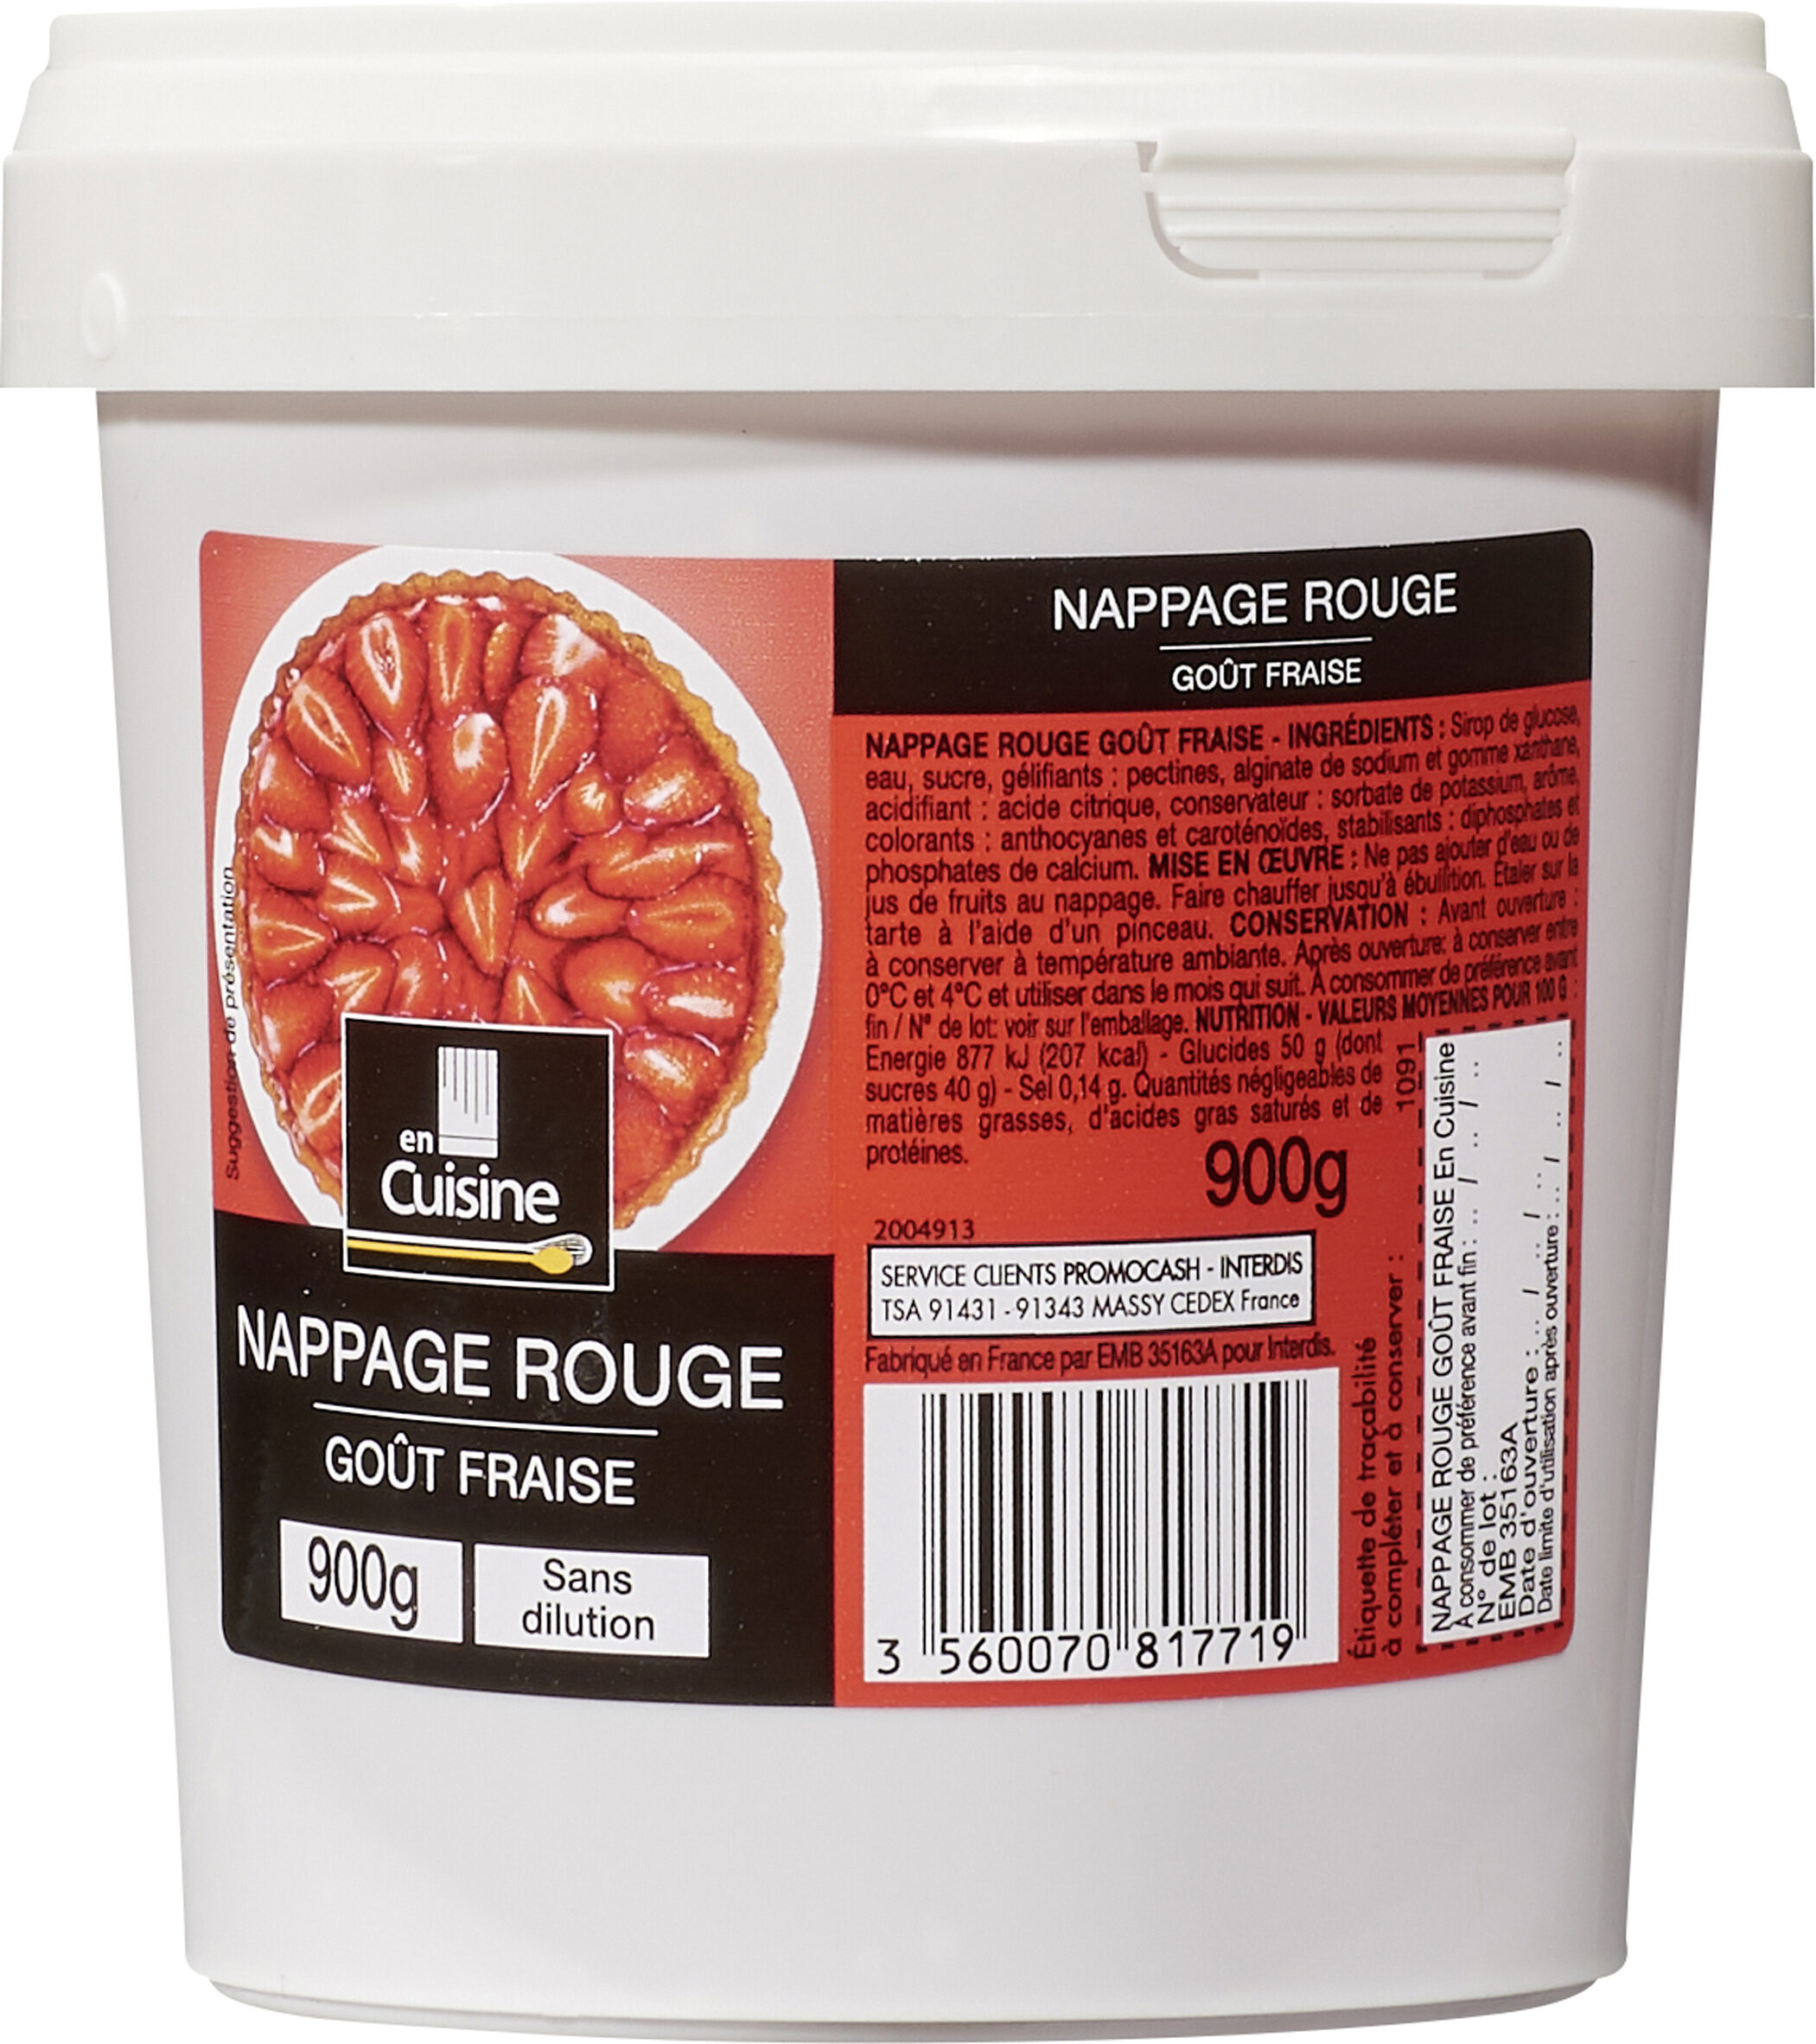 Nappage rouge gout fraise - Product - fr